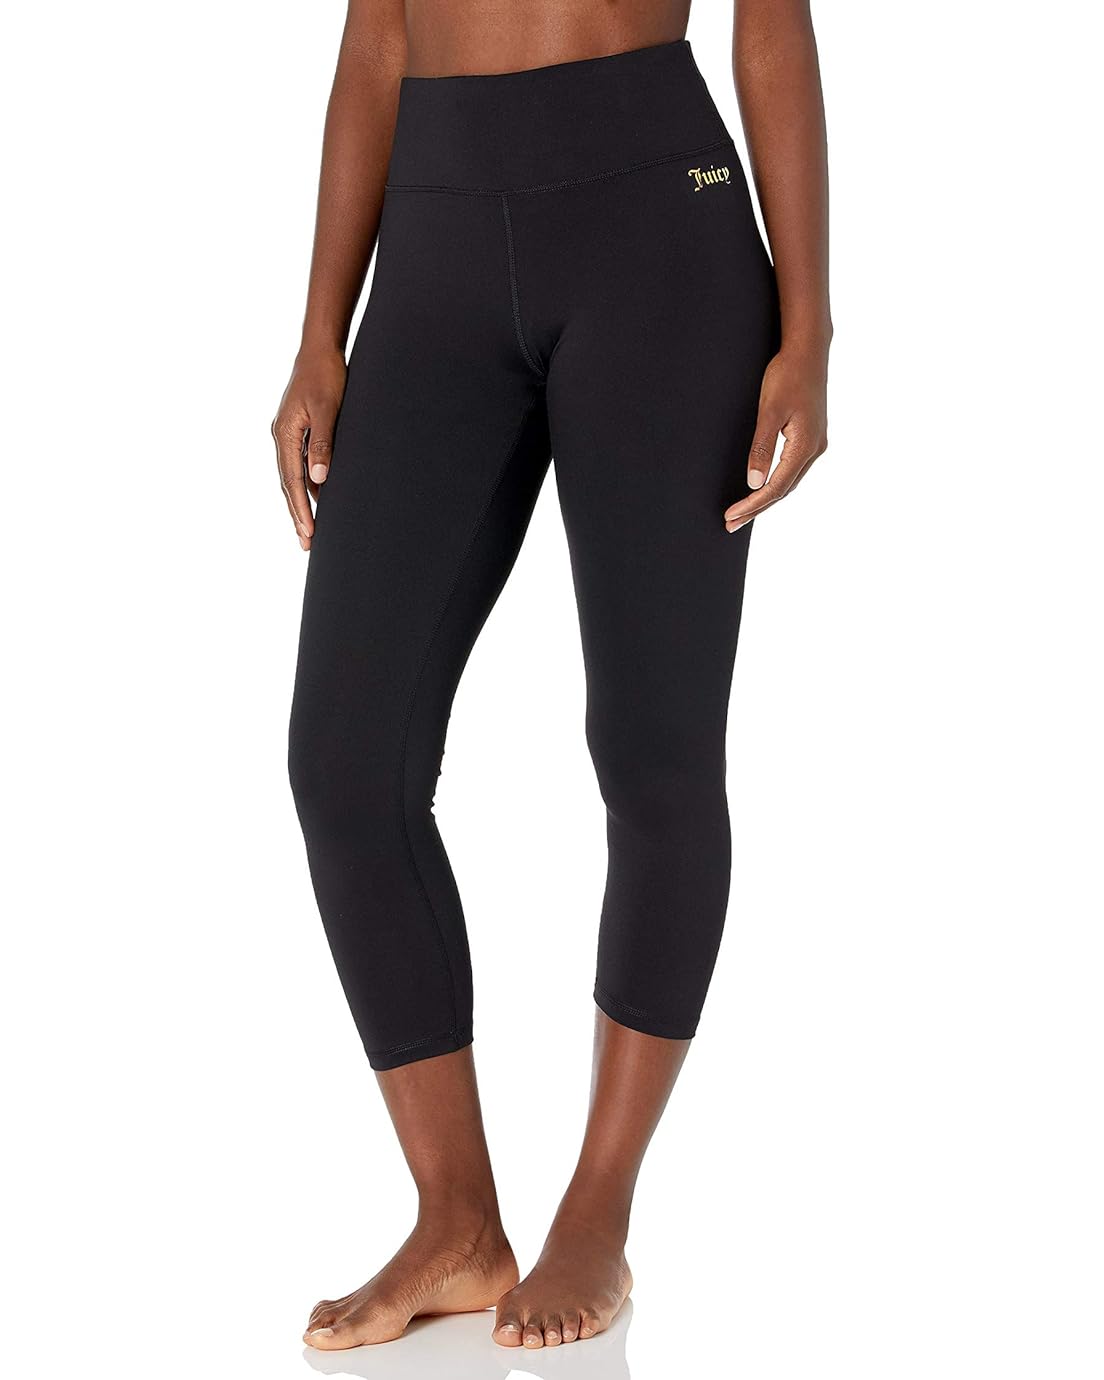 Juicy Couture Womens High Waisted Crop Yoga Tight